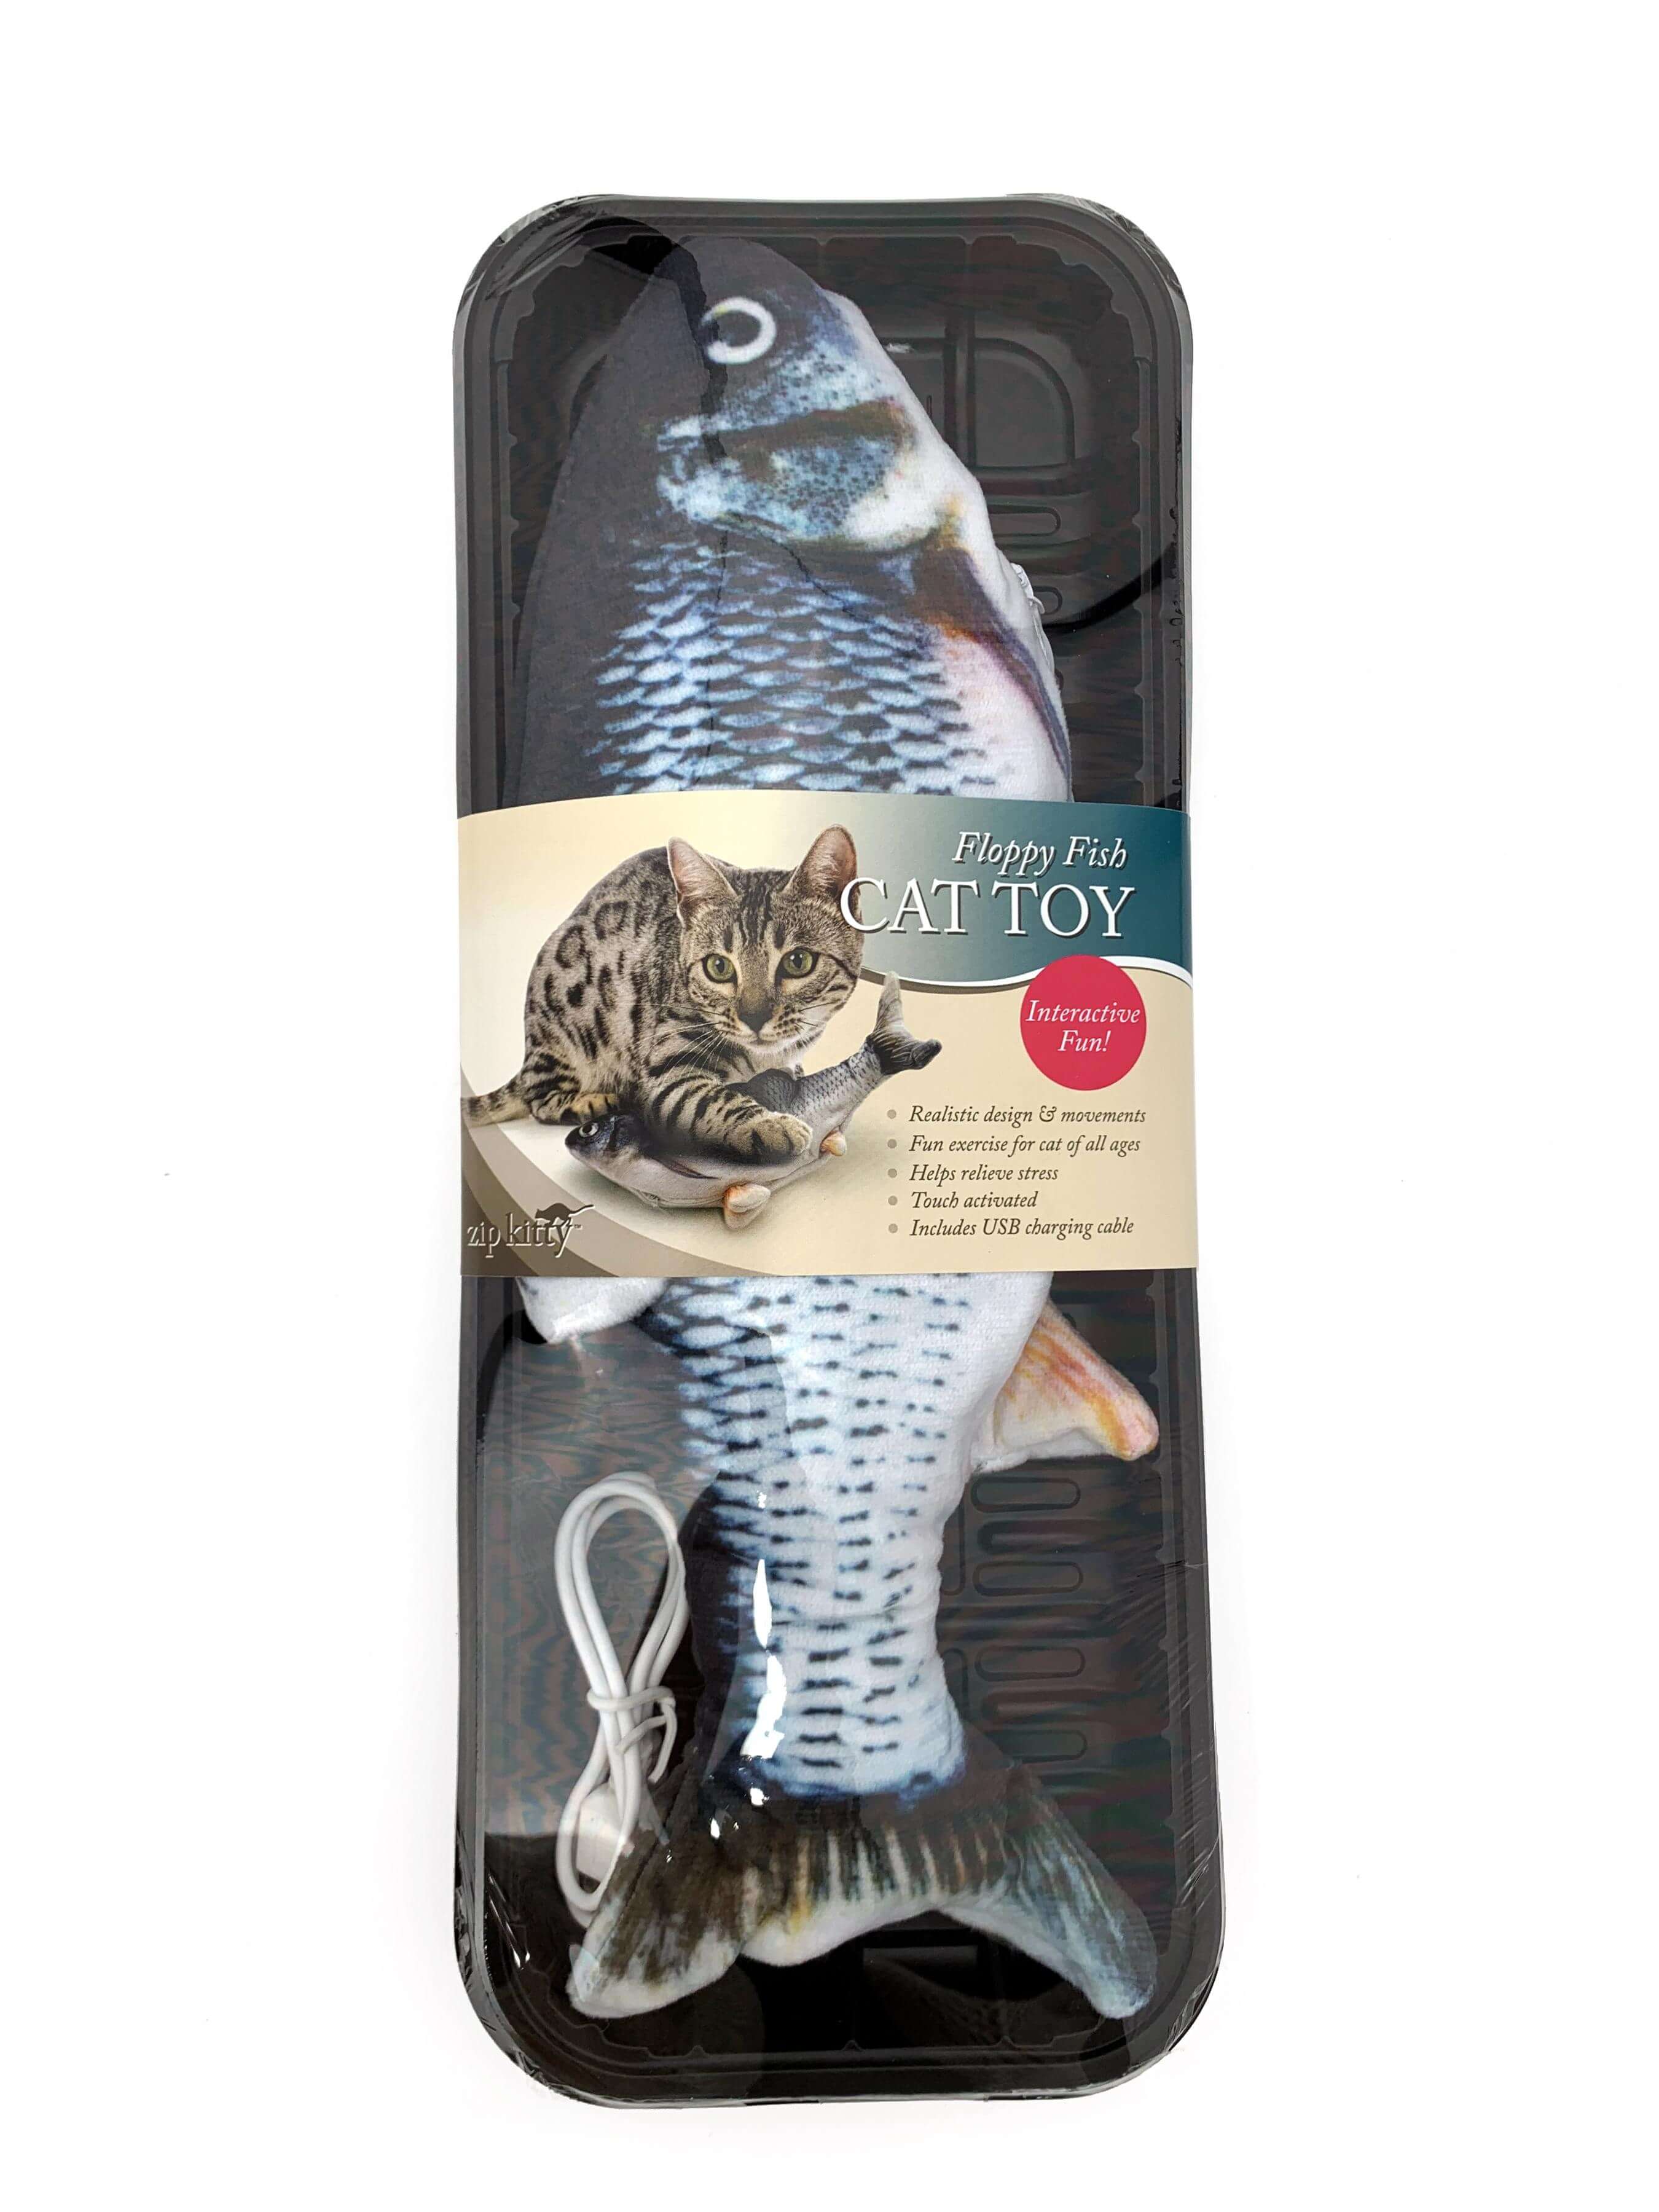 Floppy fish cat toy in packaging